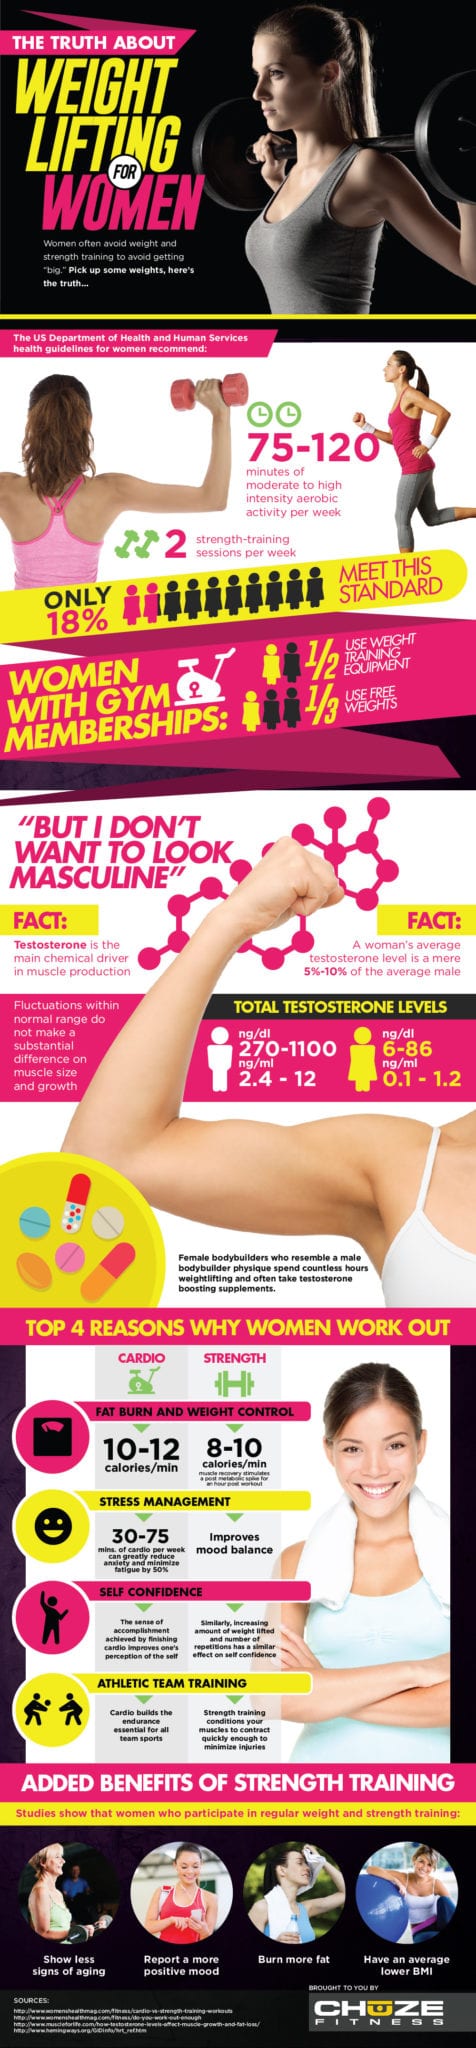 The Truth About Women’s Weightlifting [Infographic]